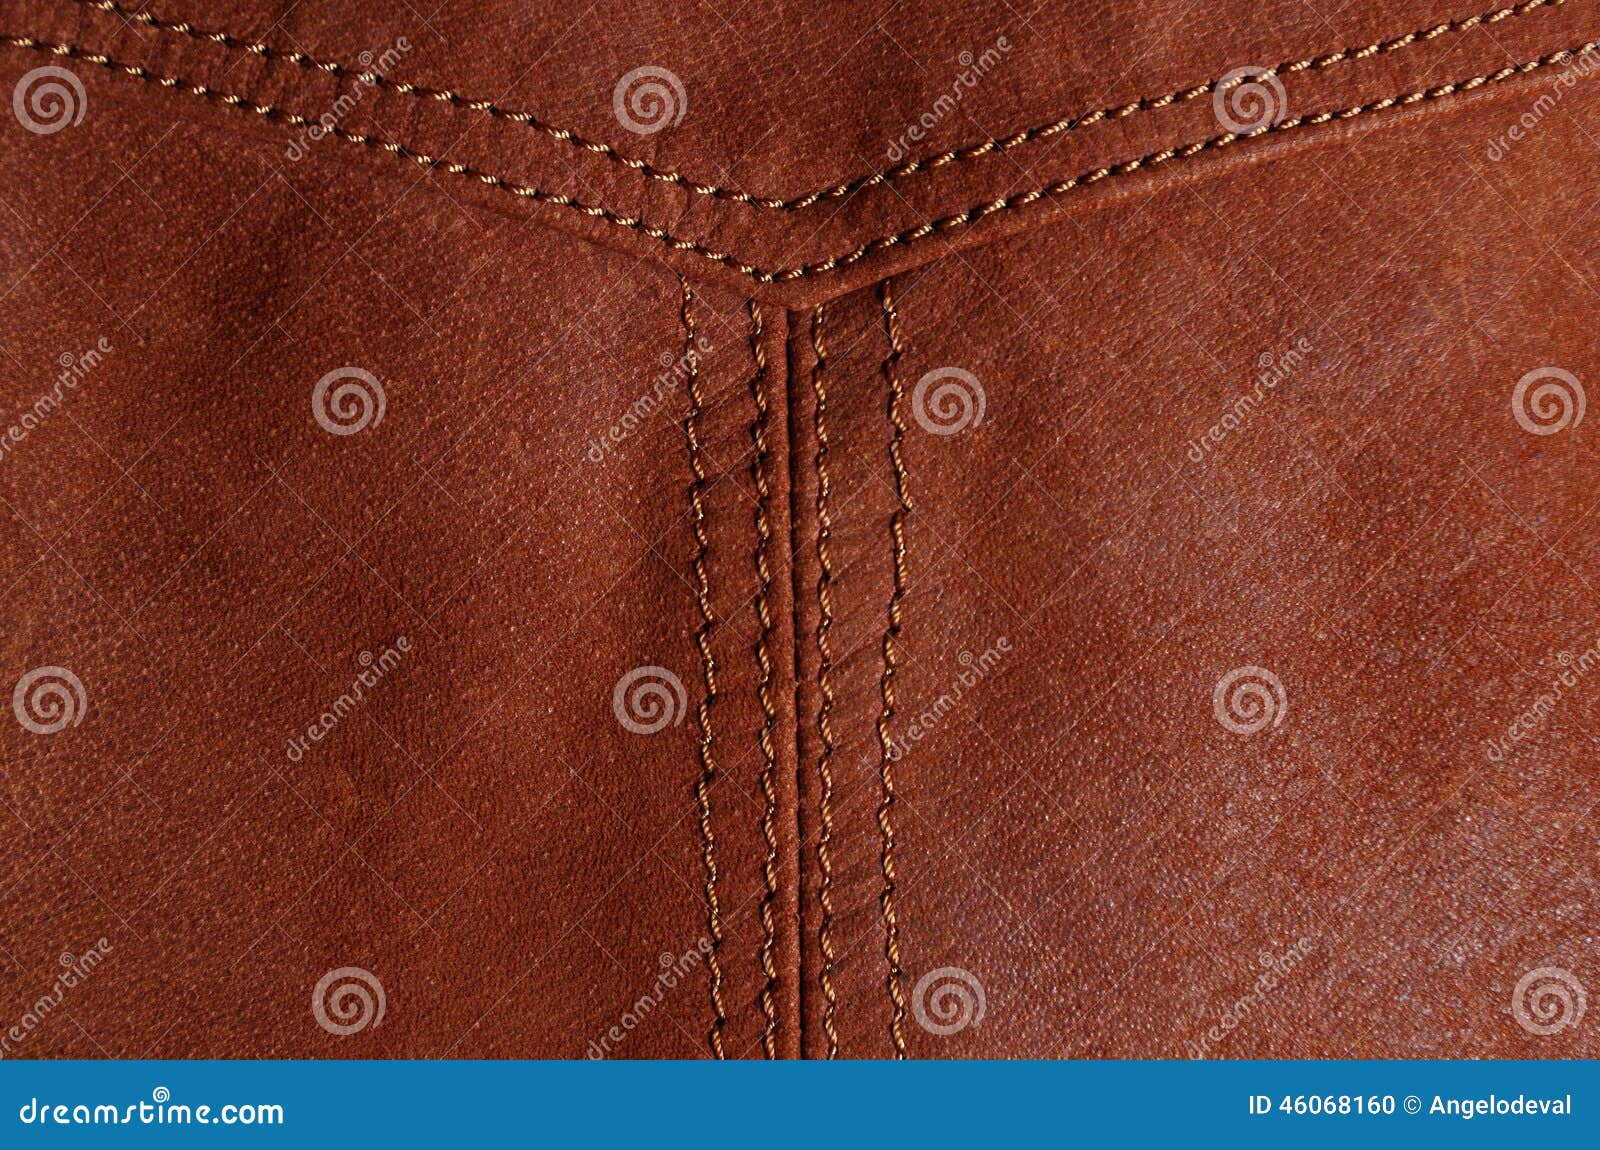 Detail of Seam in Brown Leather Jacket Stock Photo - Image of trends ...